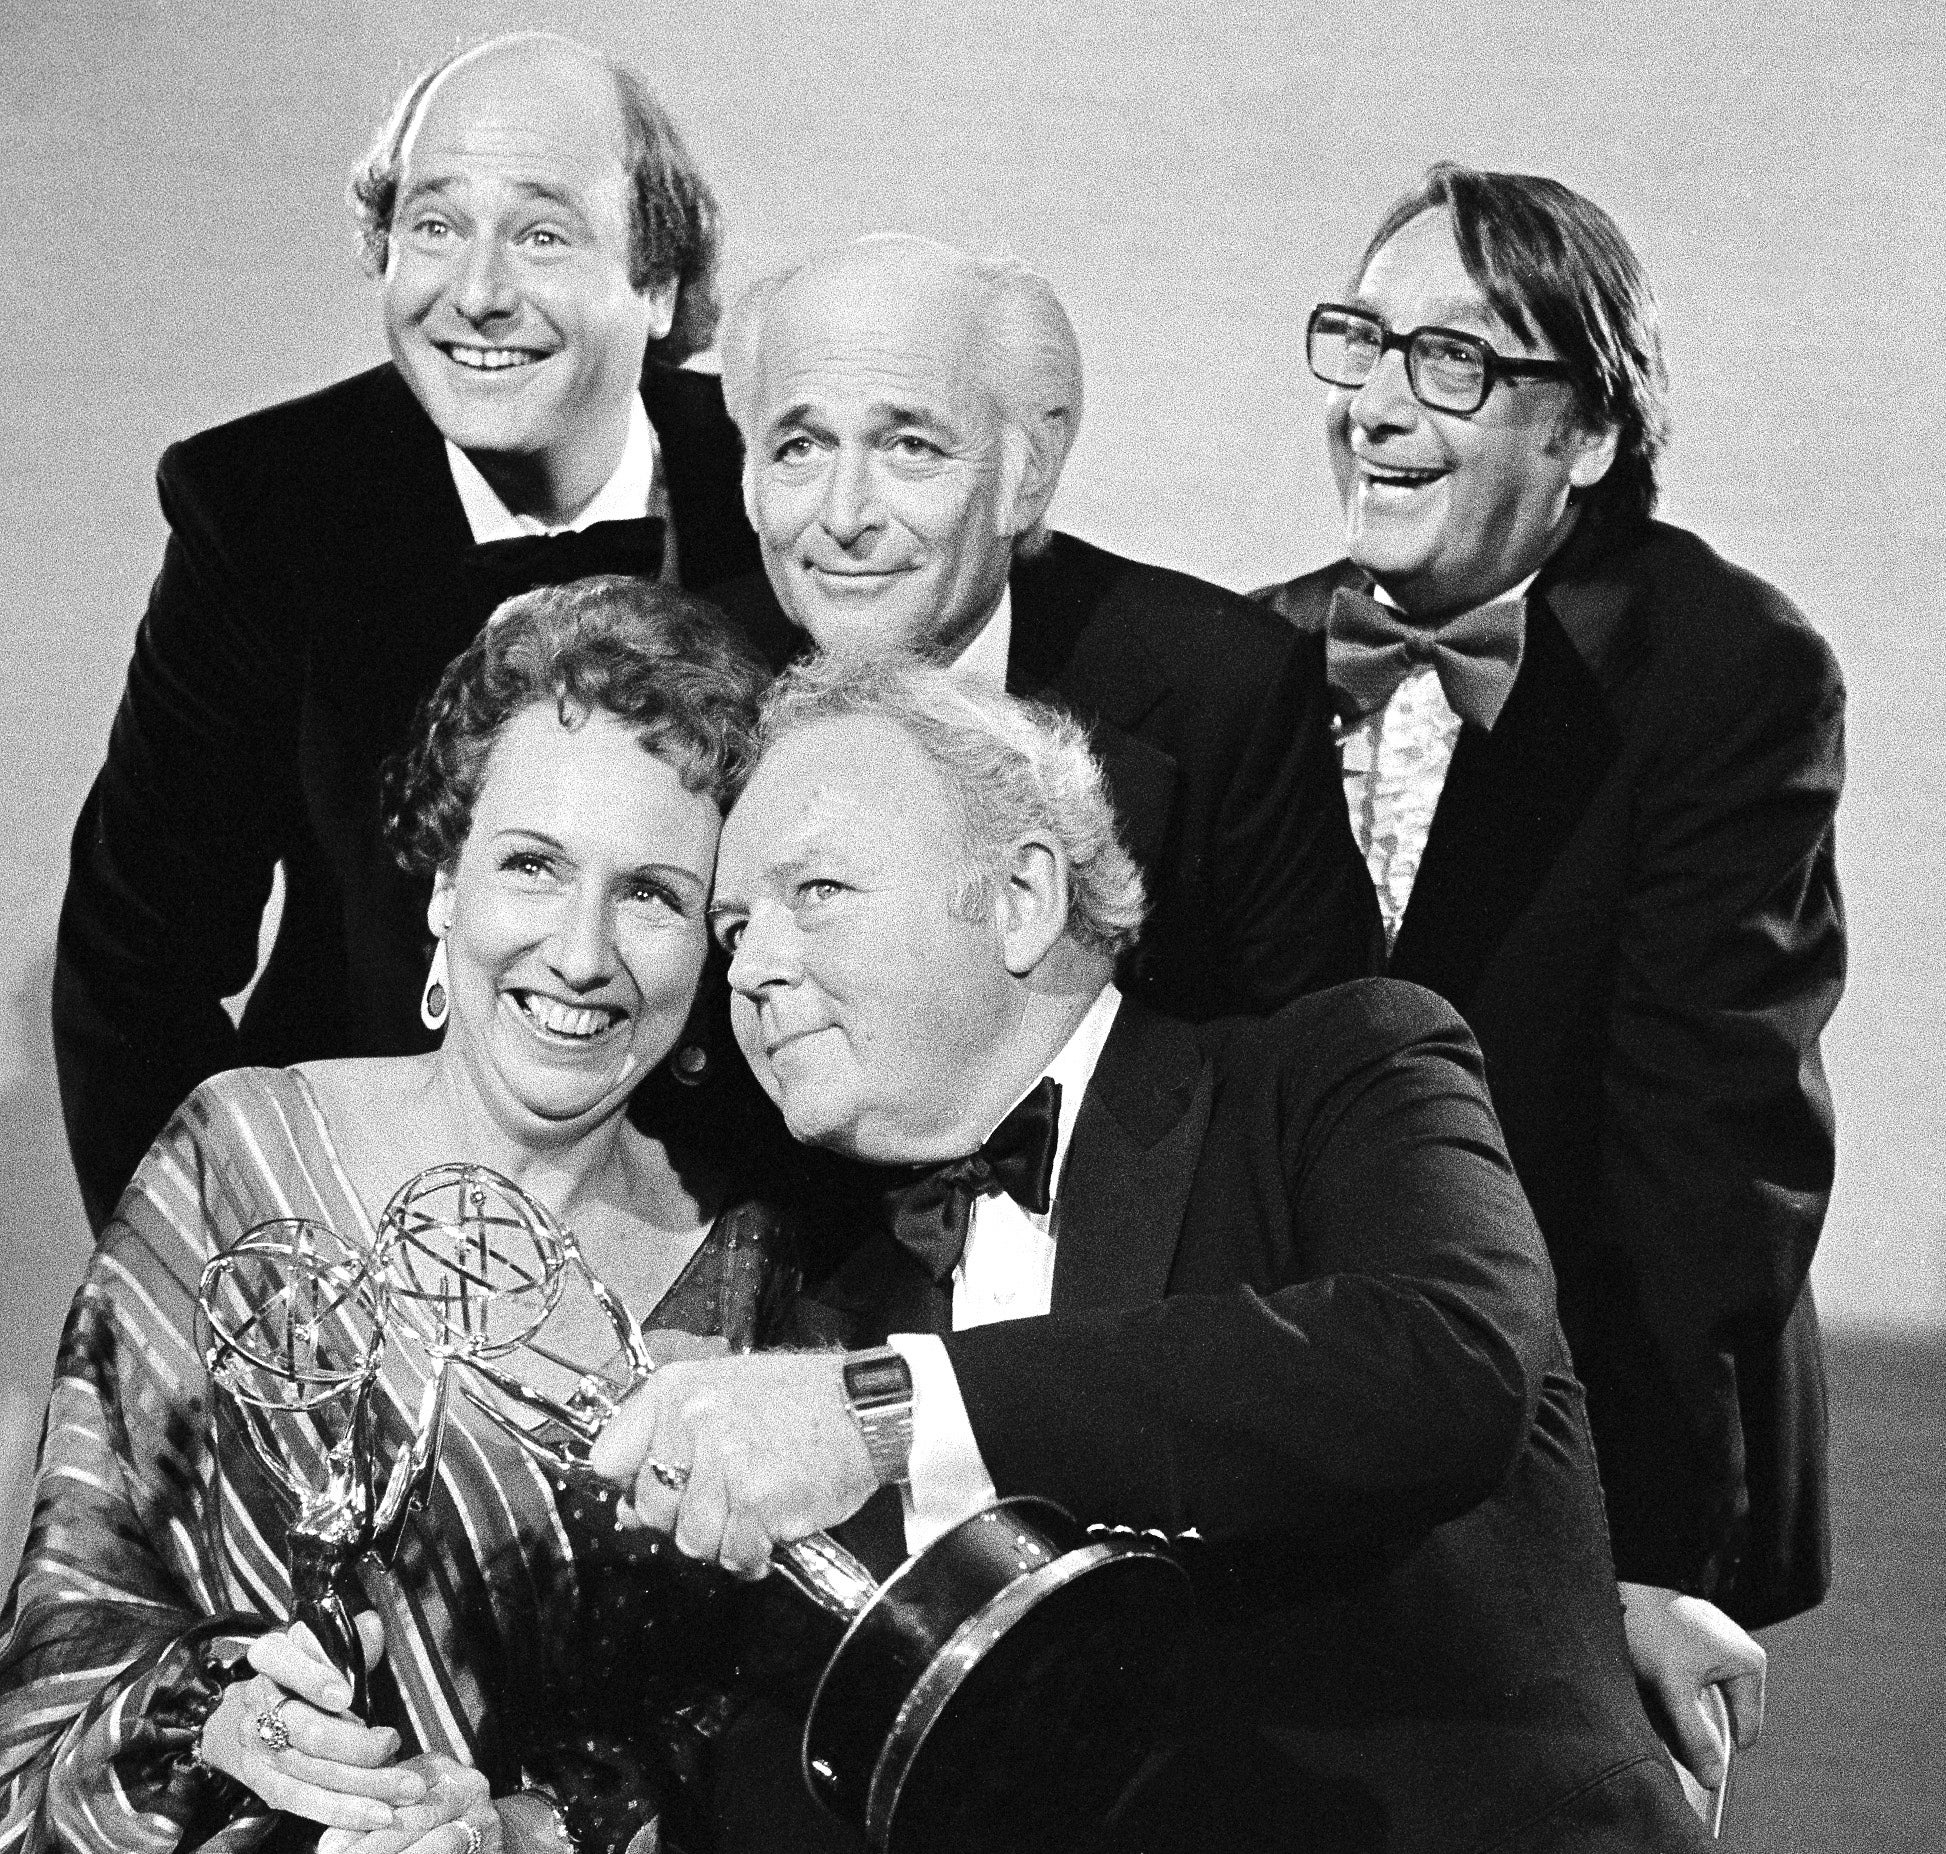 Actors Jean Stapleton, seated, left, and Carroll O'Connor, seated, right, from "All in the Family" hold their Emmys for outstanding lead actress and actor in a comedy series. 